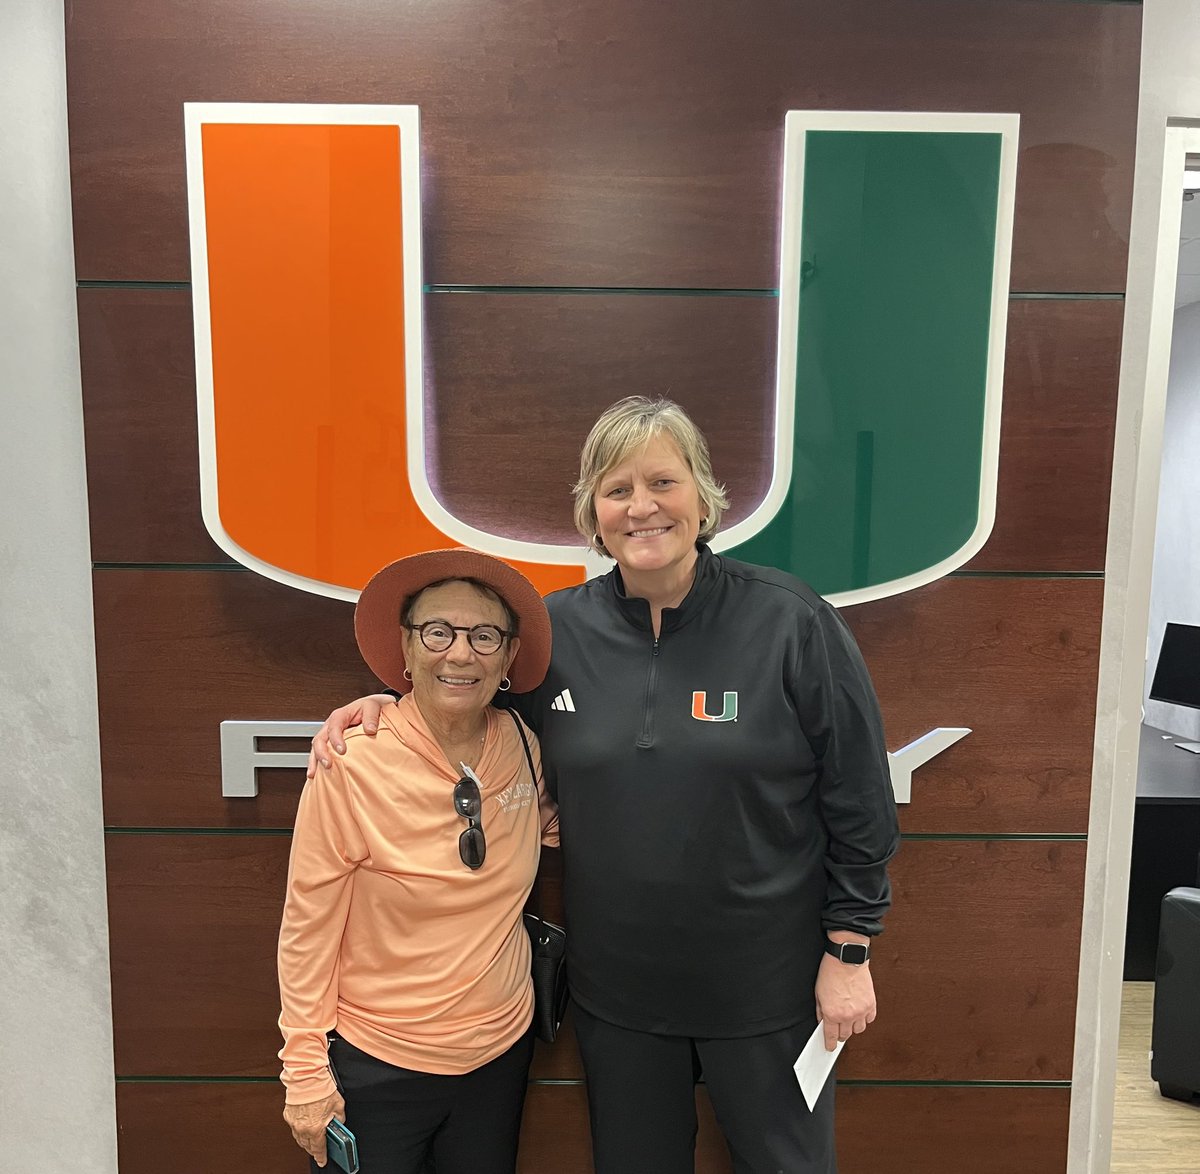 What an honor to visit with Ferne Labati today! #CaneLegend